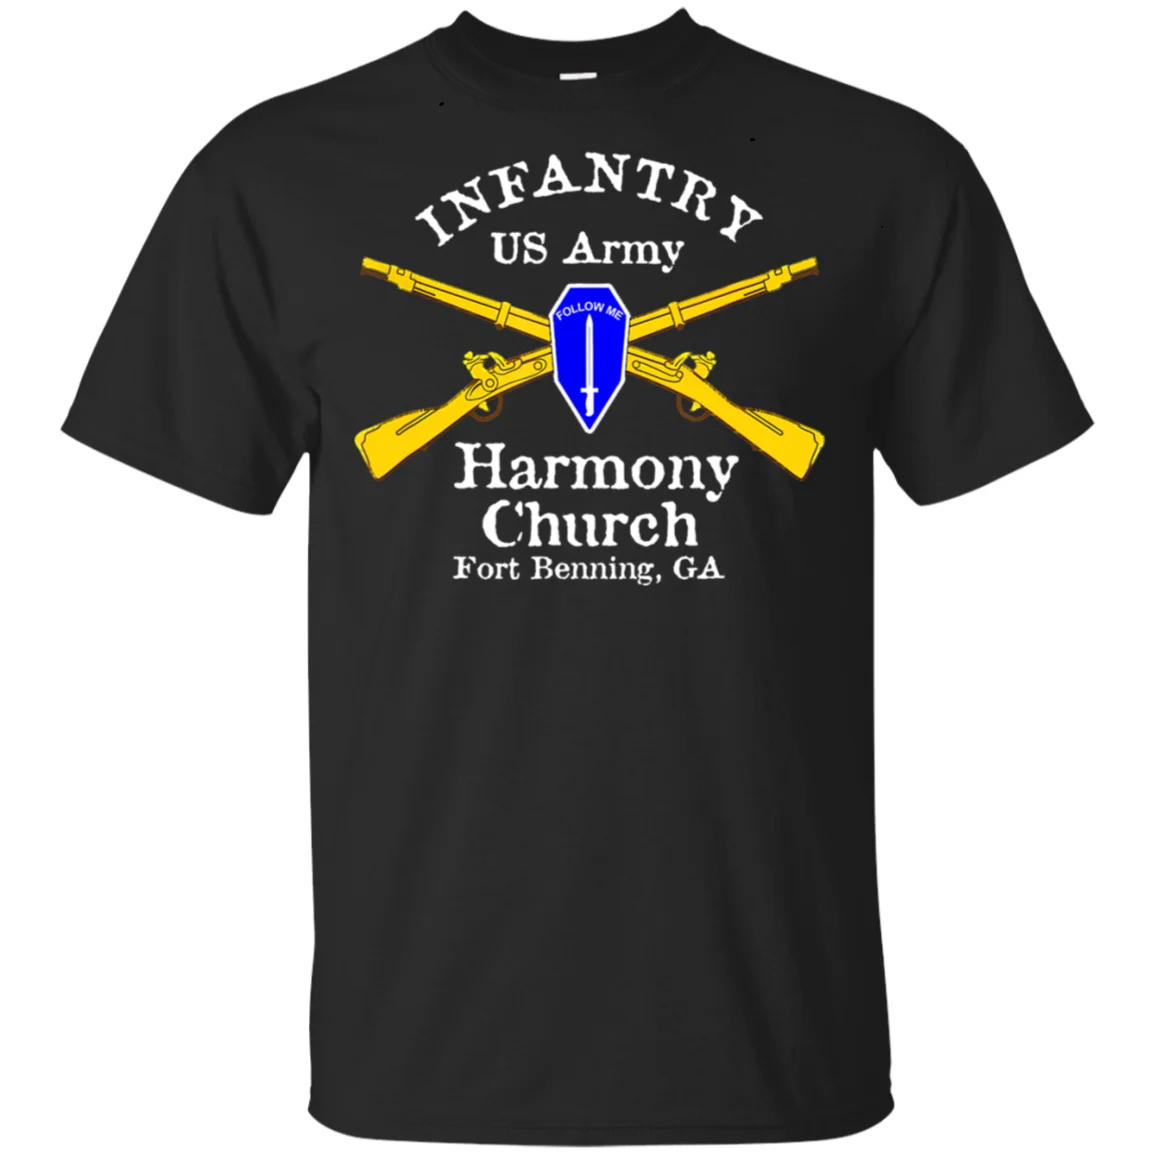 

Harmony Church Fort Benning,GA. US Army Infantry Military T Shirt. Short Sleeve 100% Cotton Casual T-shirts Loose Top Size S-3XL